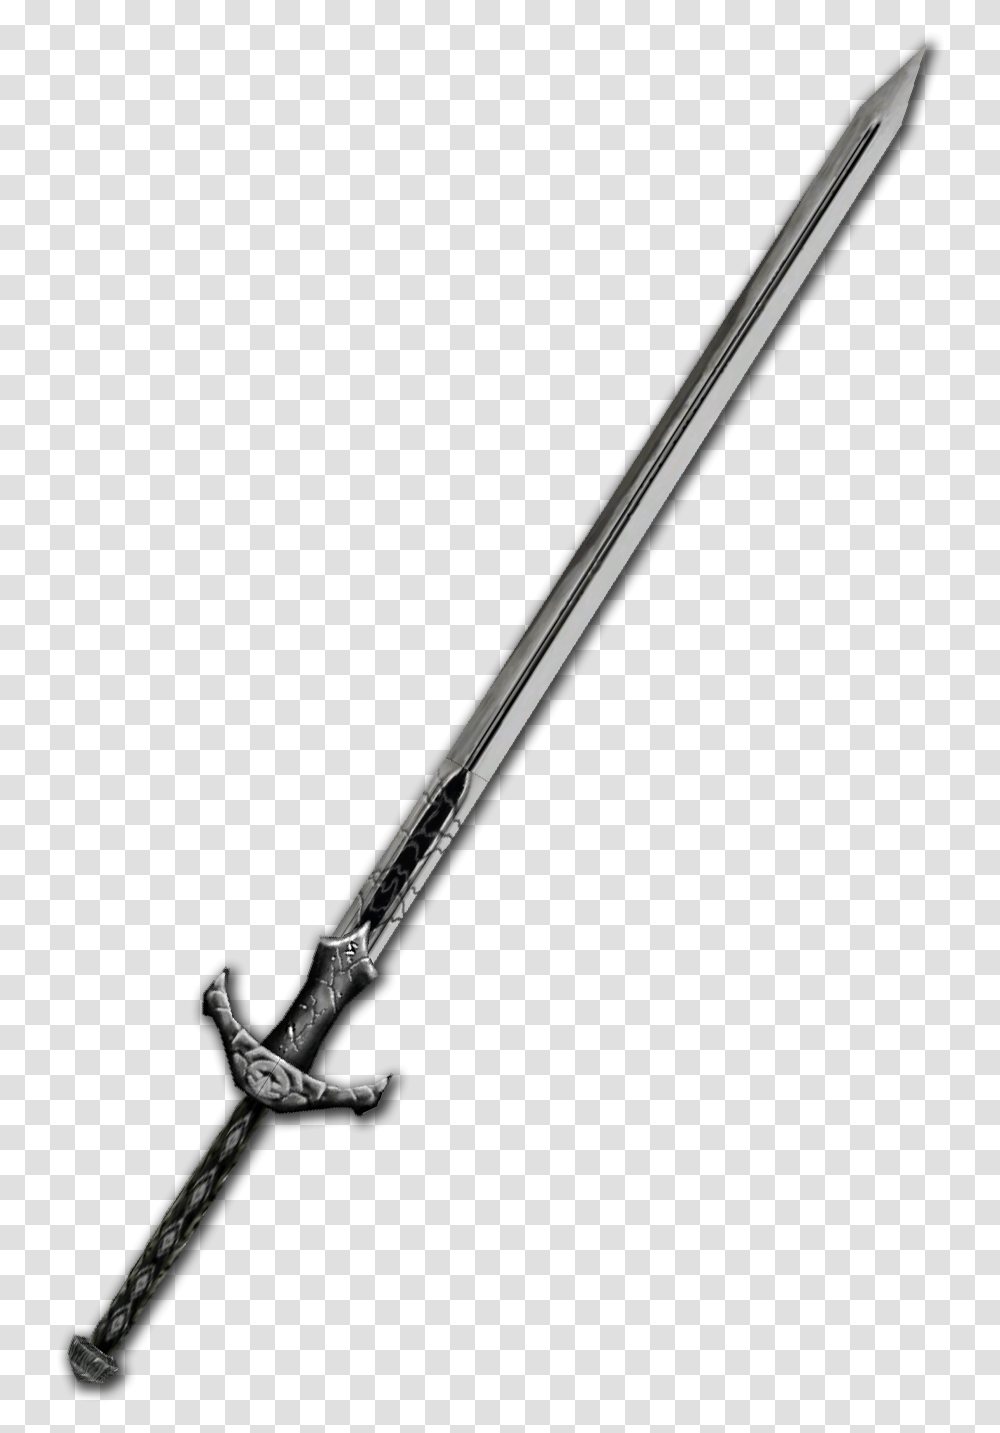 Free Download Of Swords Clipart Gun For Picsart, Blade, Weapon, Weaponry Transparent Png